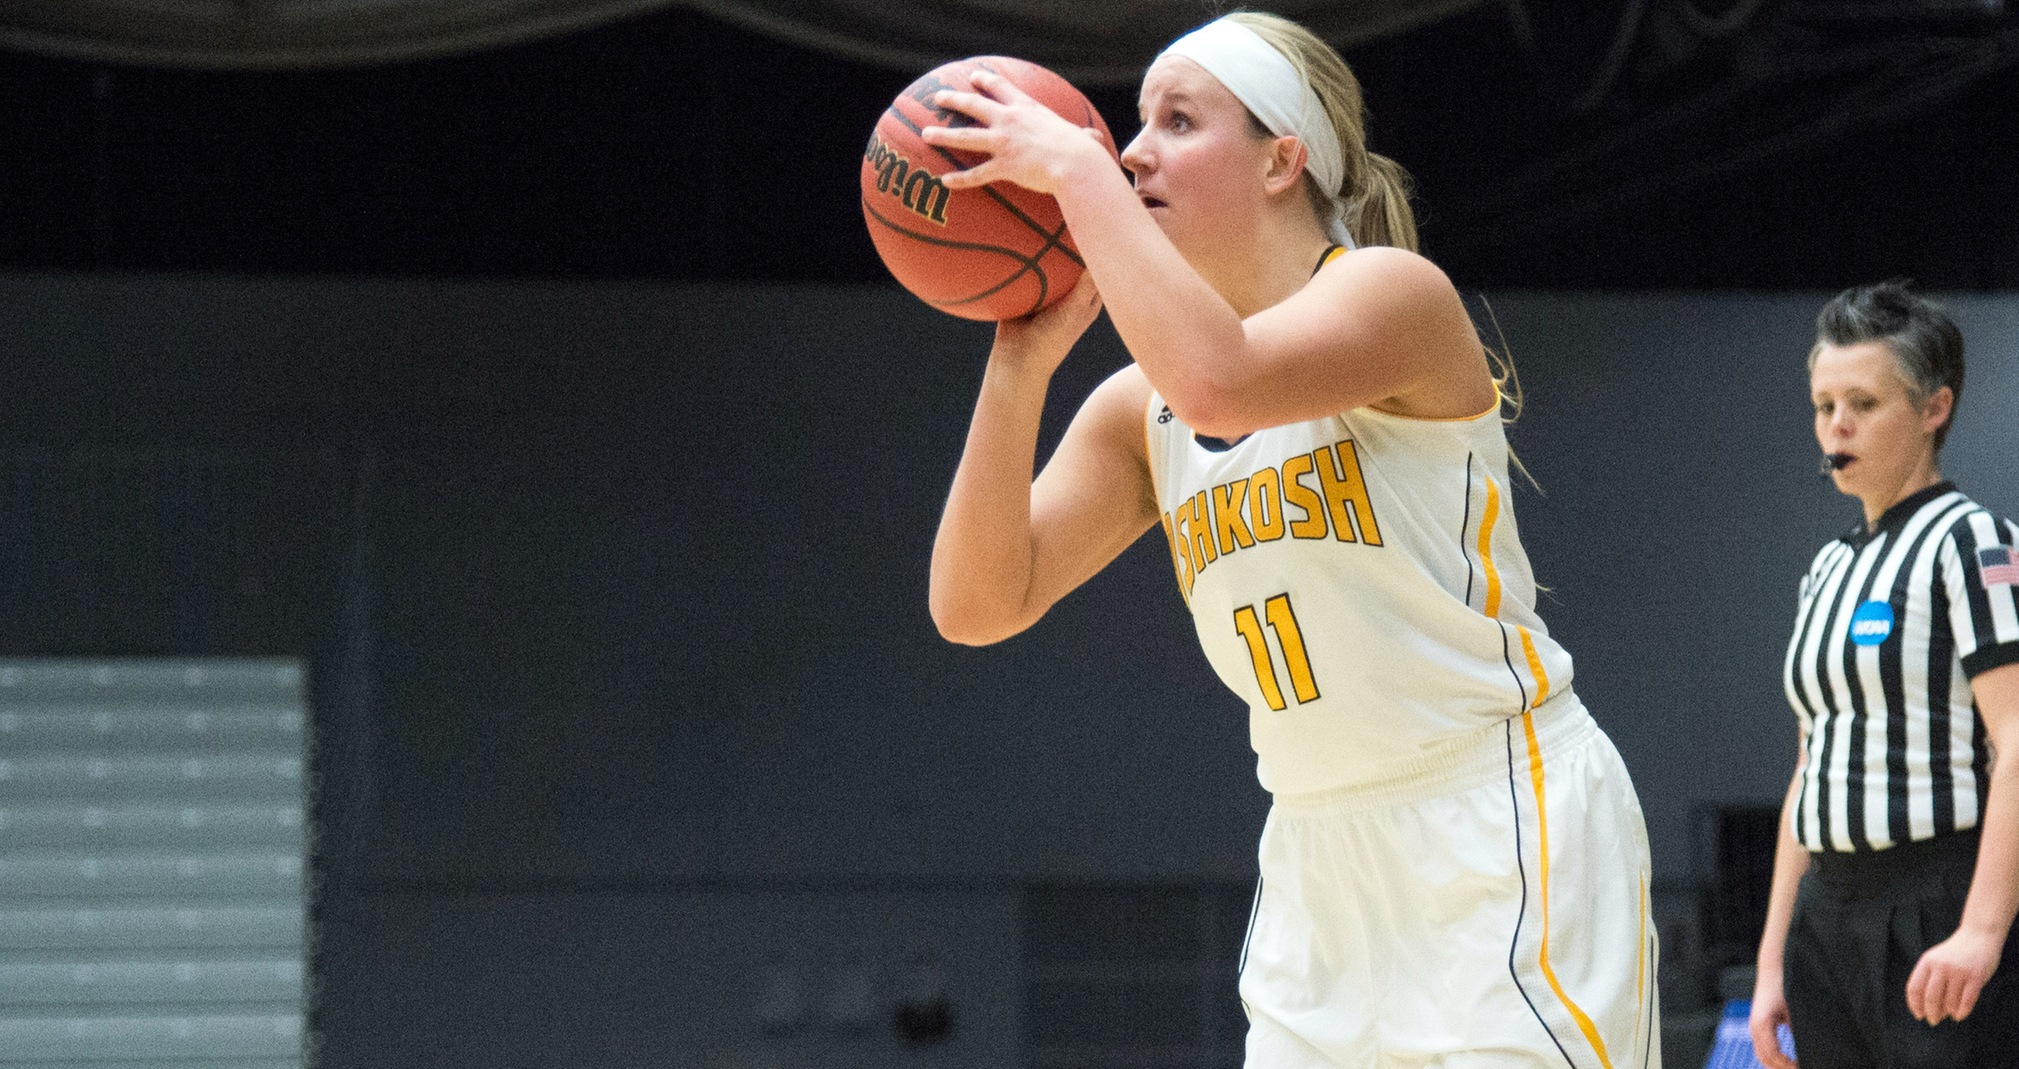 Emma Melotik converted 5 of 8 3-point shots against the Knights to match a career high with 15 points.